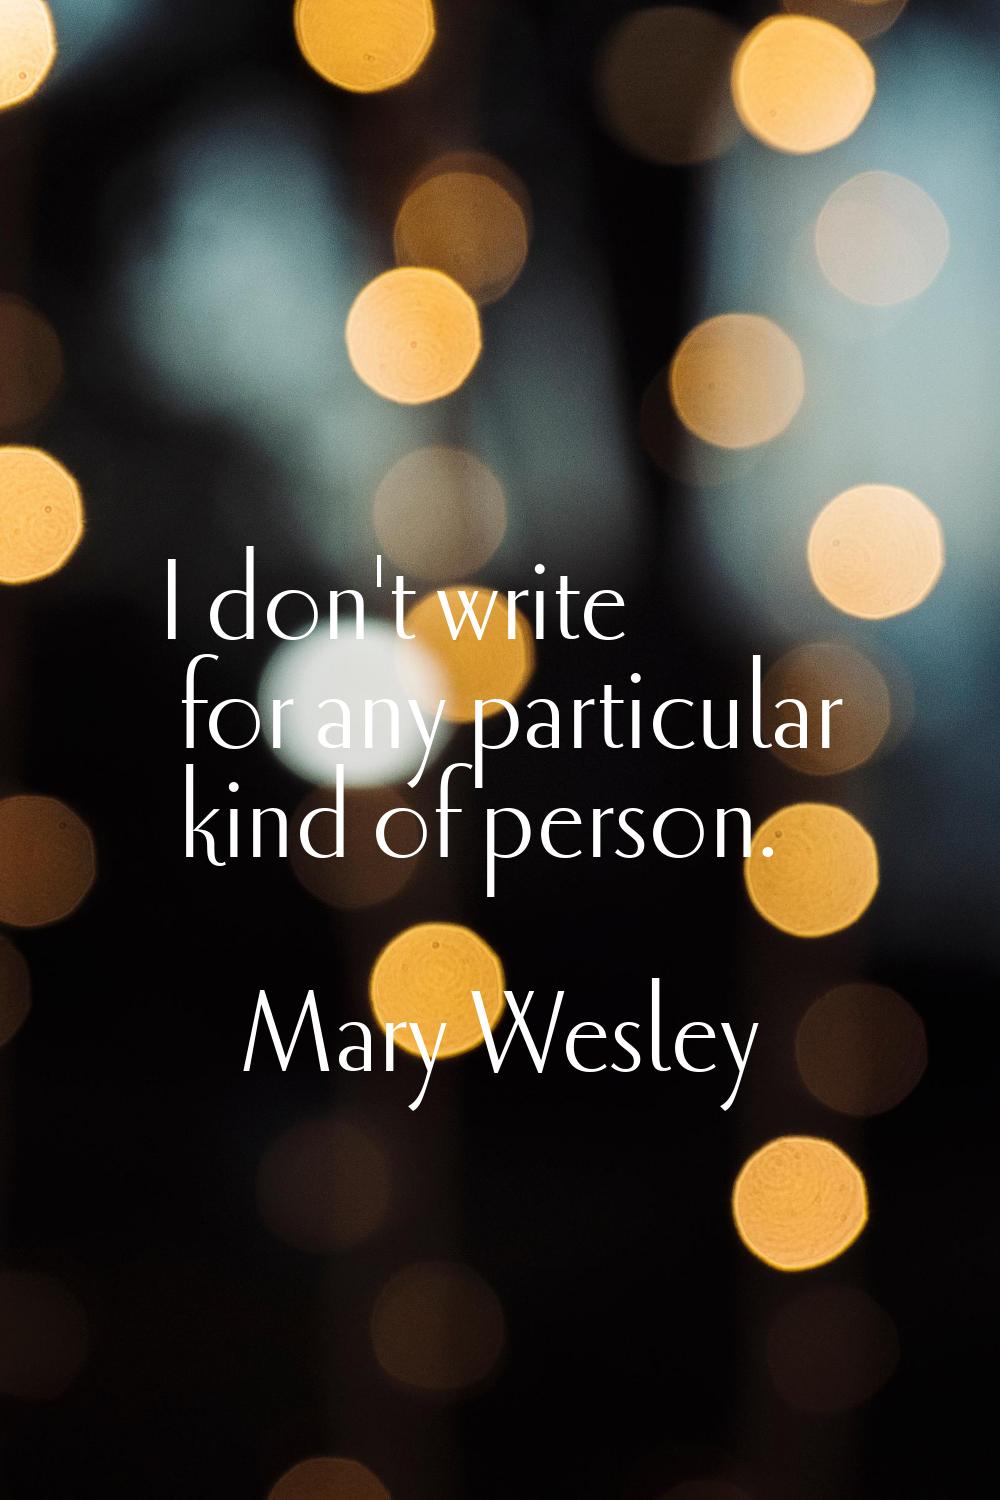 I don't write for any particular kind of person.